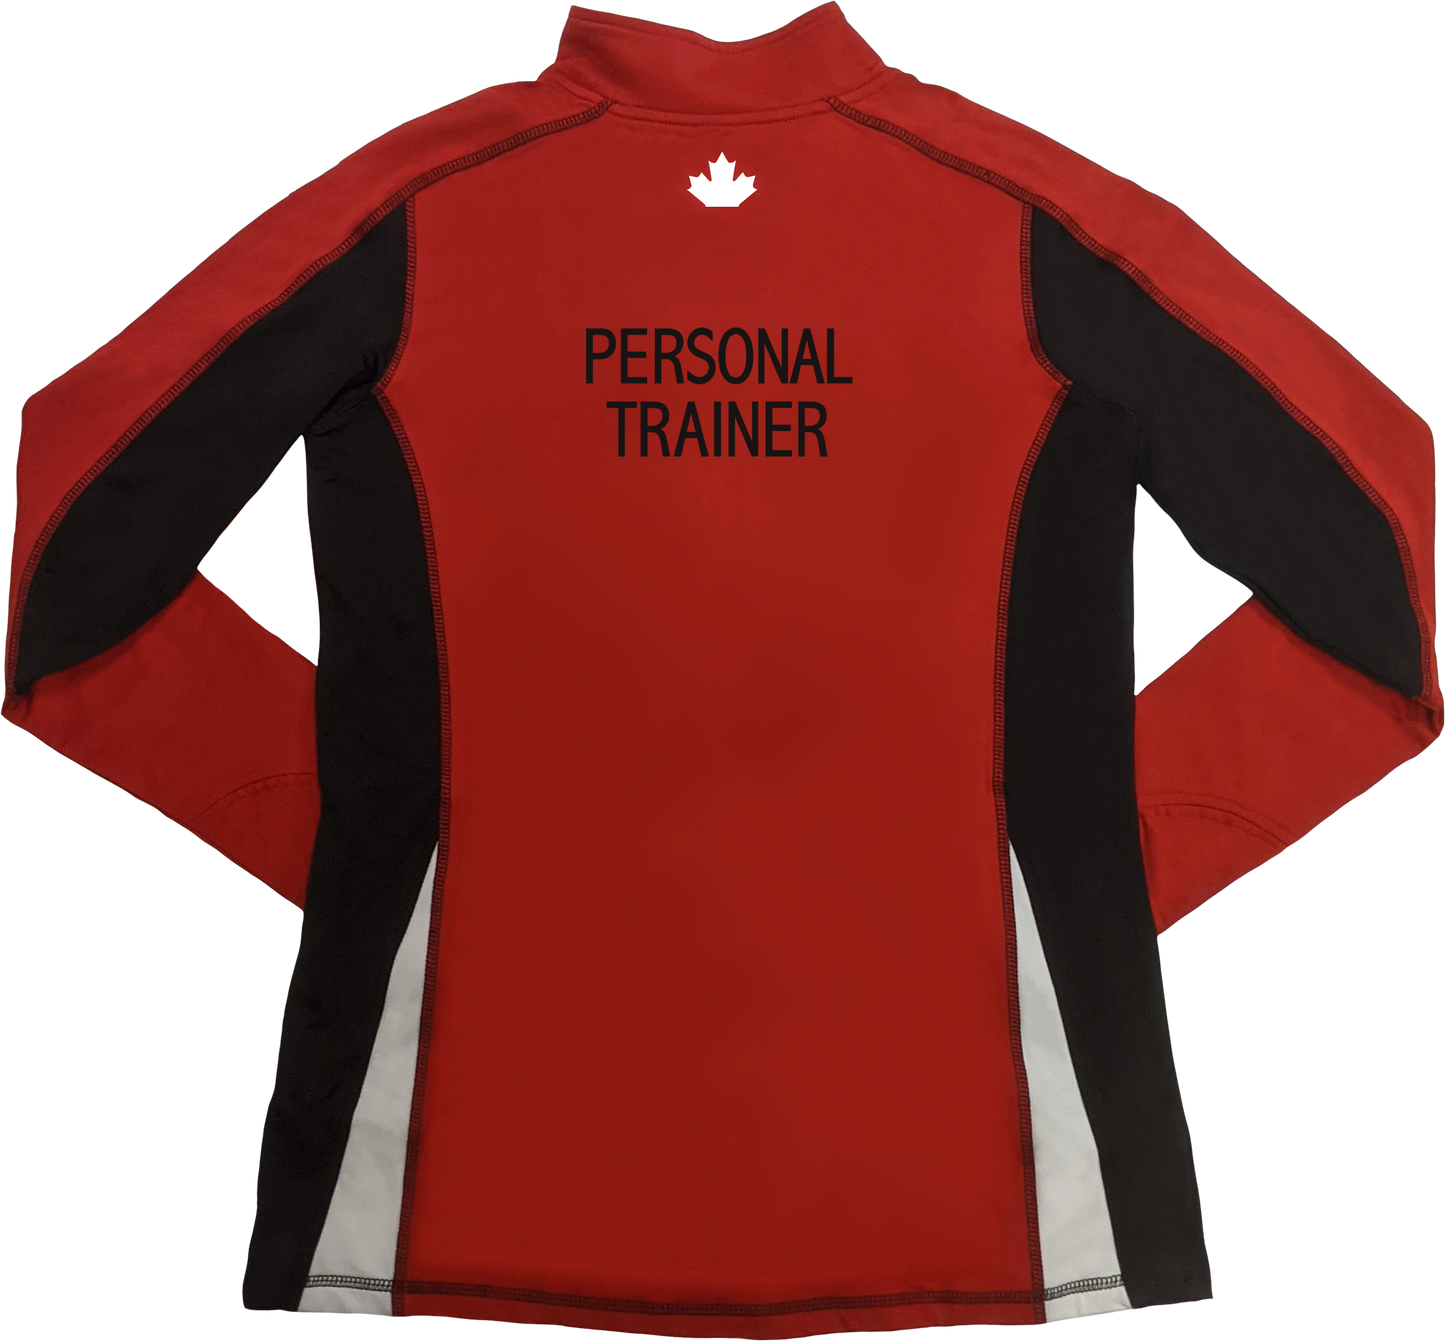 GoodLife Fitness Ladies Personal Trainer 1/4 Zip Pullover